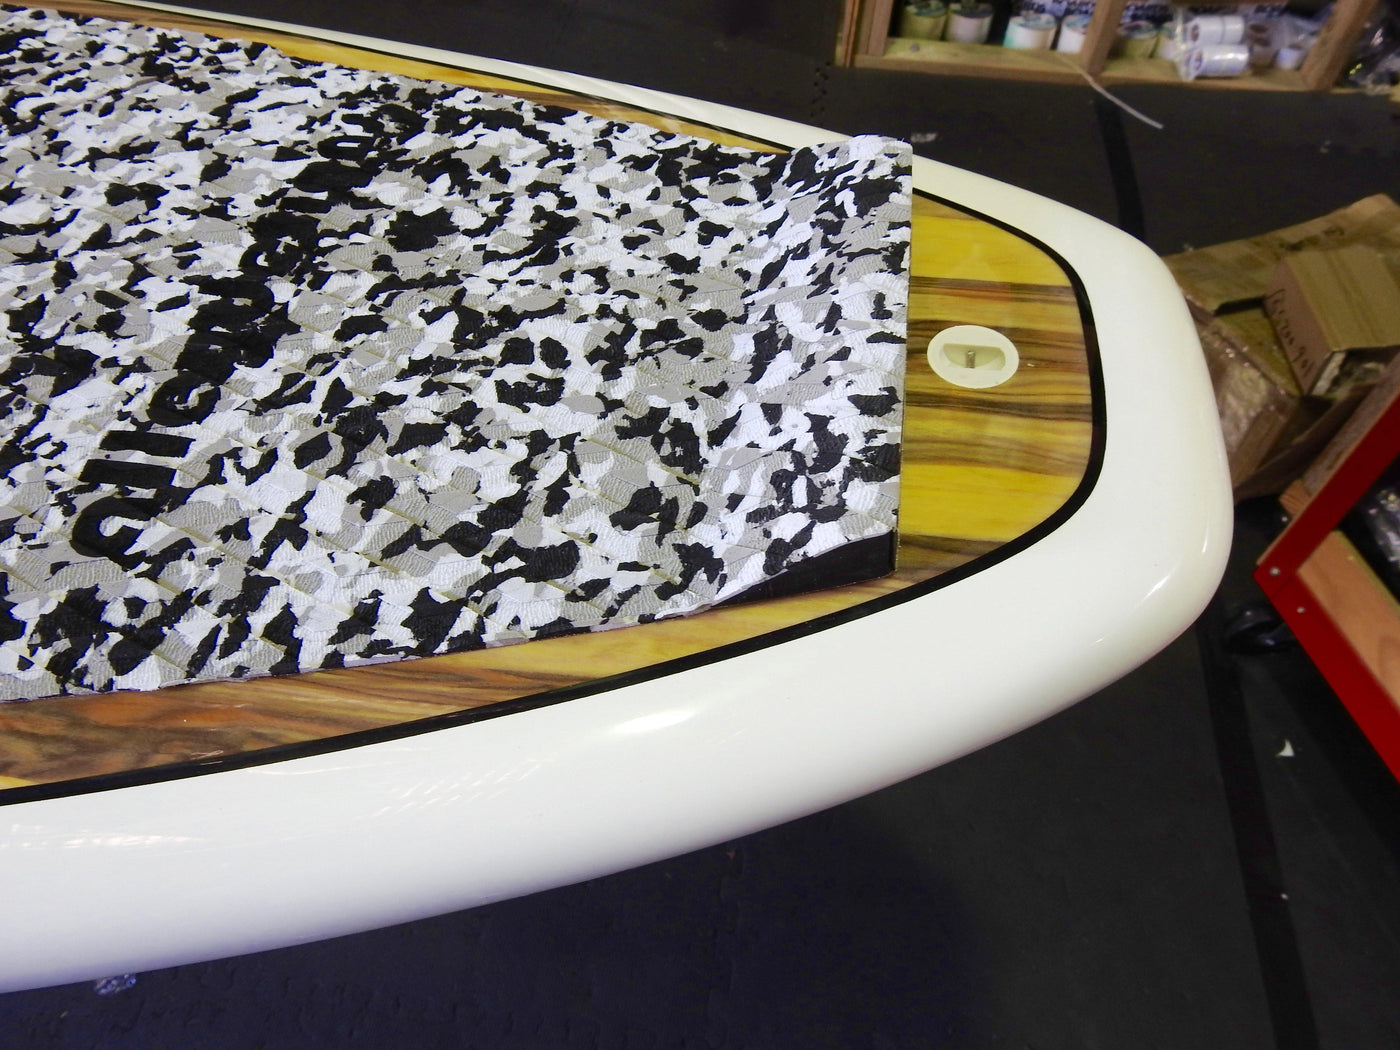 10'6” x 32" Timber White Classic Turtle Alleydesigns SUP 11KG - Alleydesigns  Pty Ltd                                             ABN: 44165571264